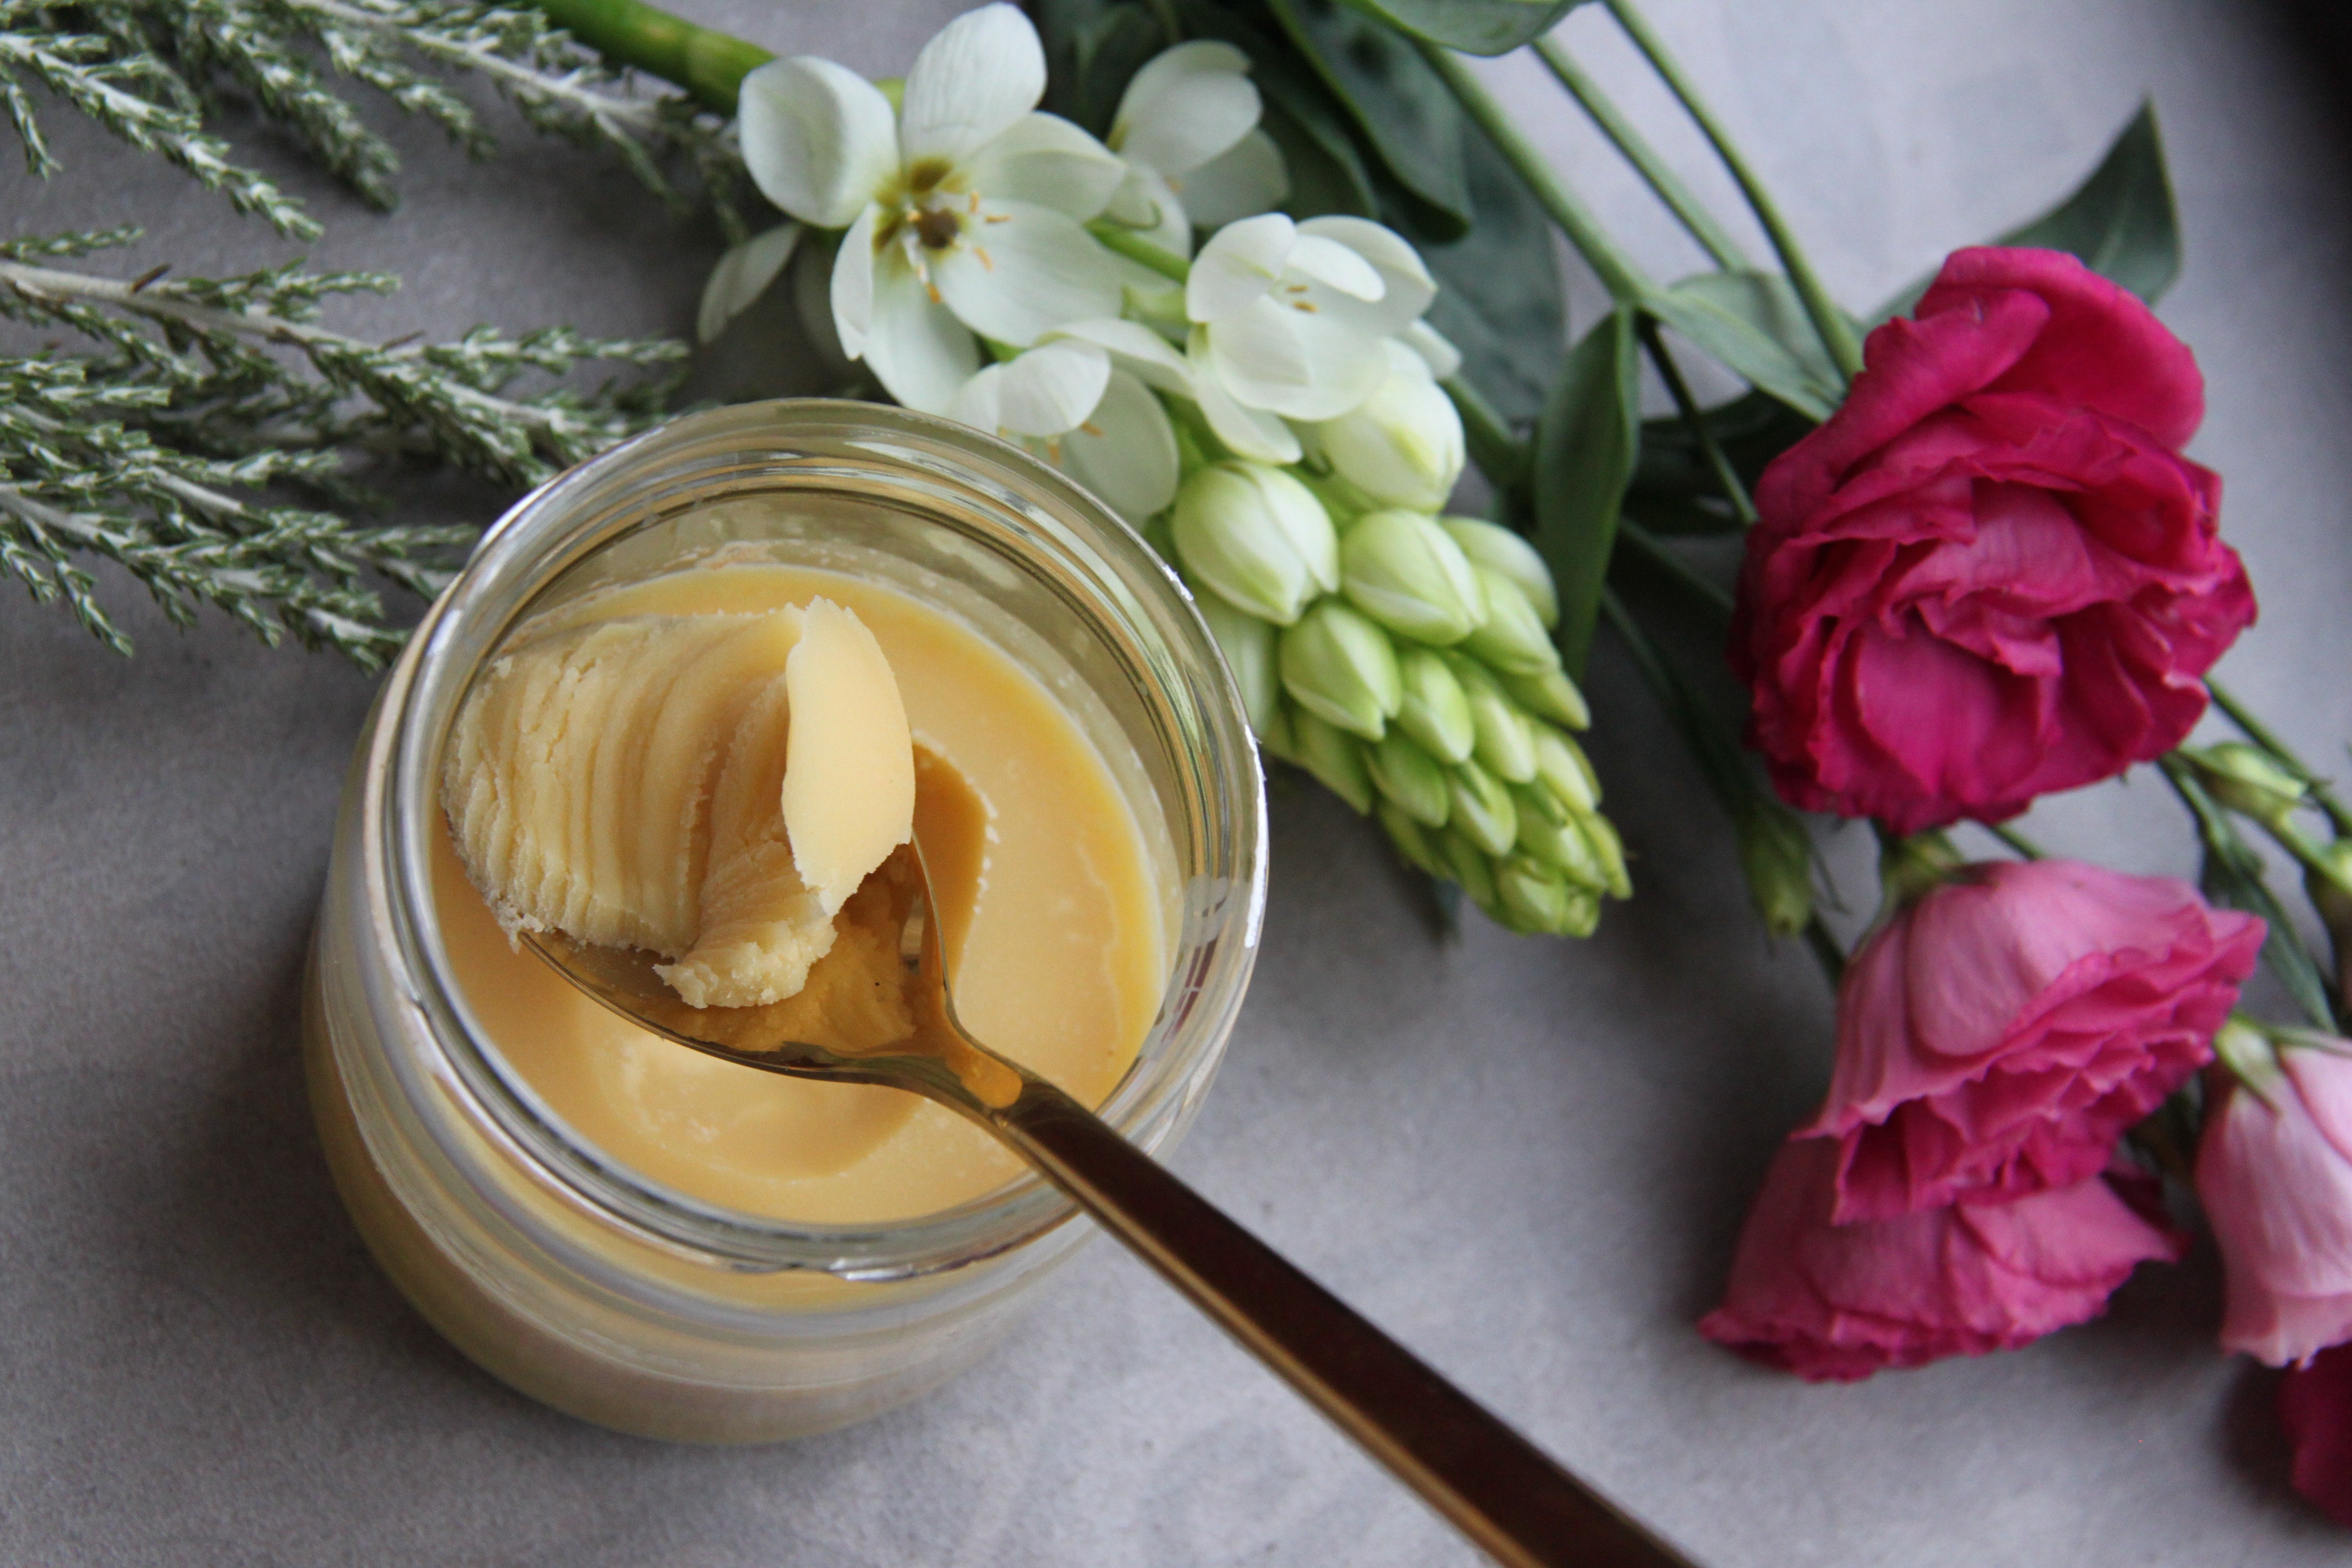 Make Your Own Scented Whipped Shea Butter At Home - Scent DNA Perfume Oils